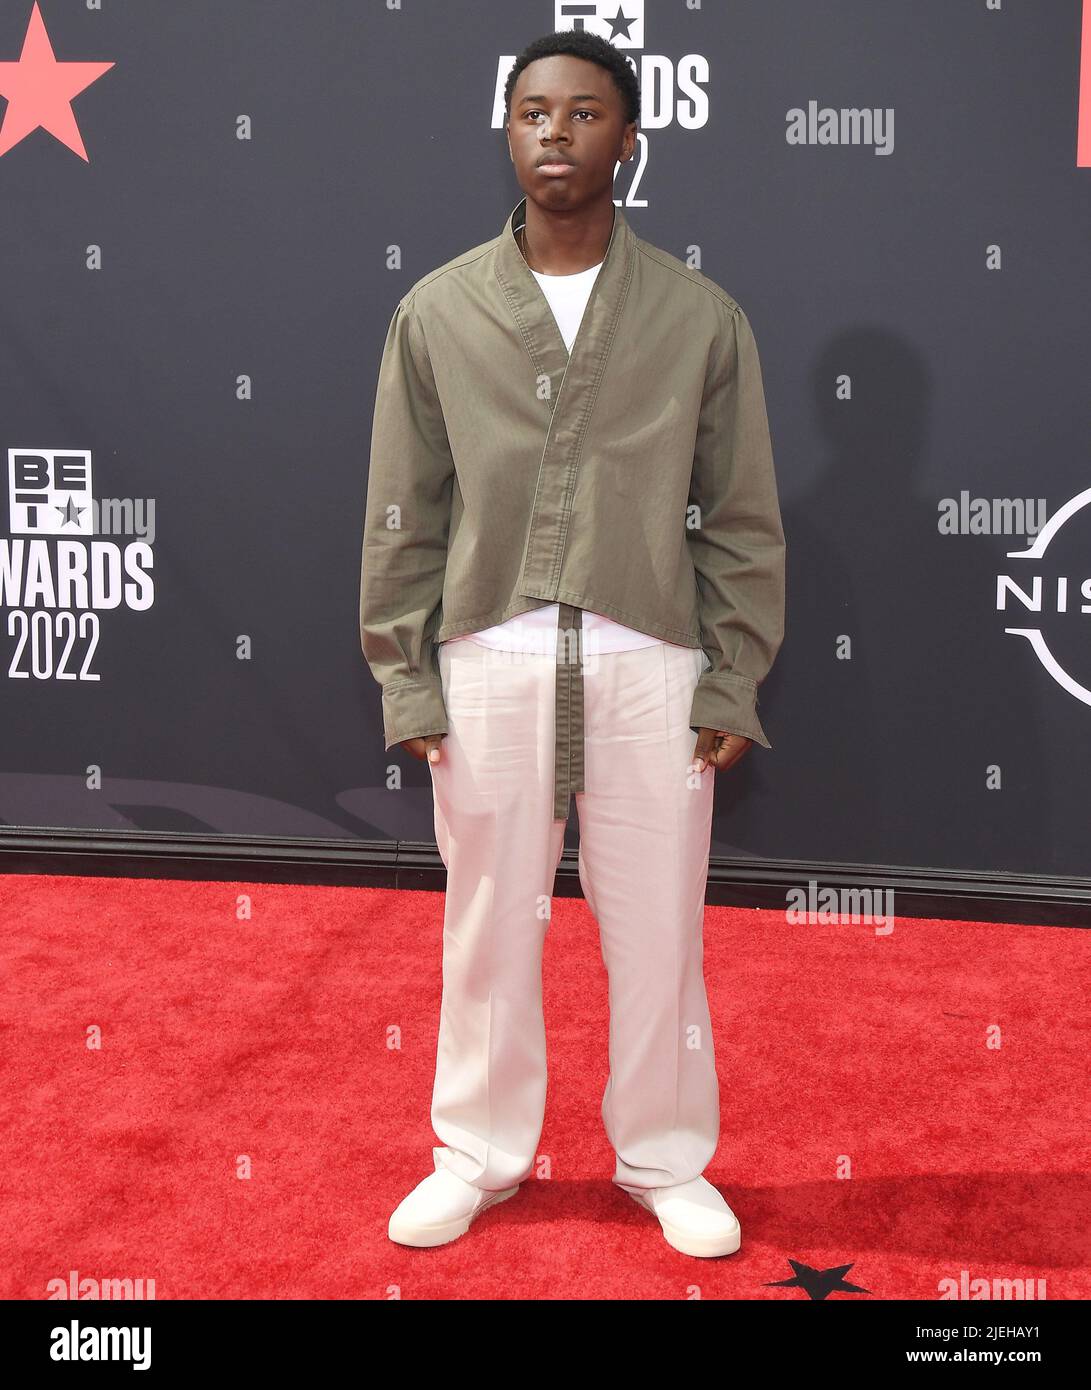 Los Angeles, USA. 26th June, 2022. Alex Hibbert arrives at the BET Awards 2022 held at the Microsoft Theater in Los Angeles, CA on Sunday, ?June 26, 2022. (Photo By Sthanlee B. Mirador/Sipa USA) Credit: Sipa USA/Alamy Live News Stock Photo